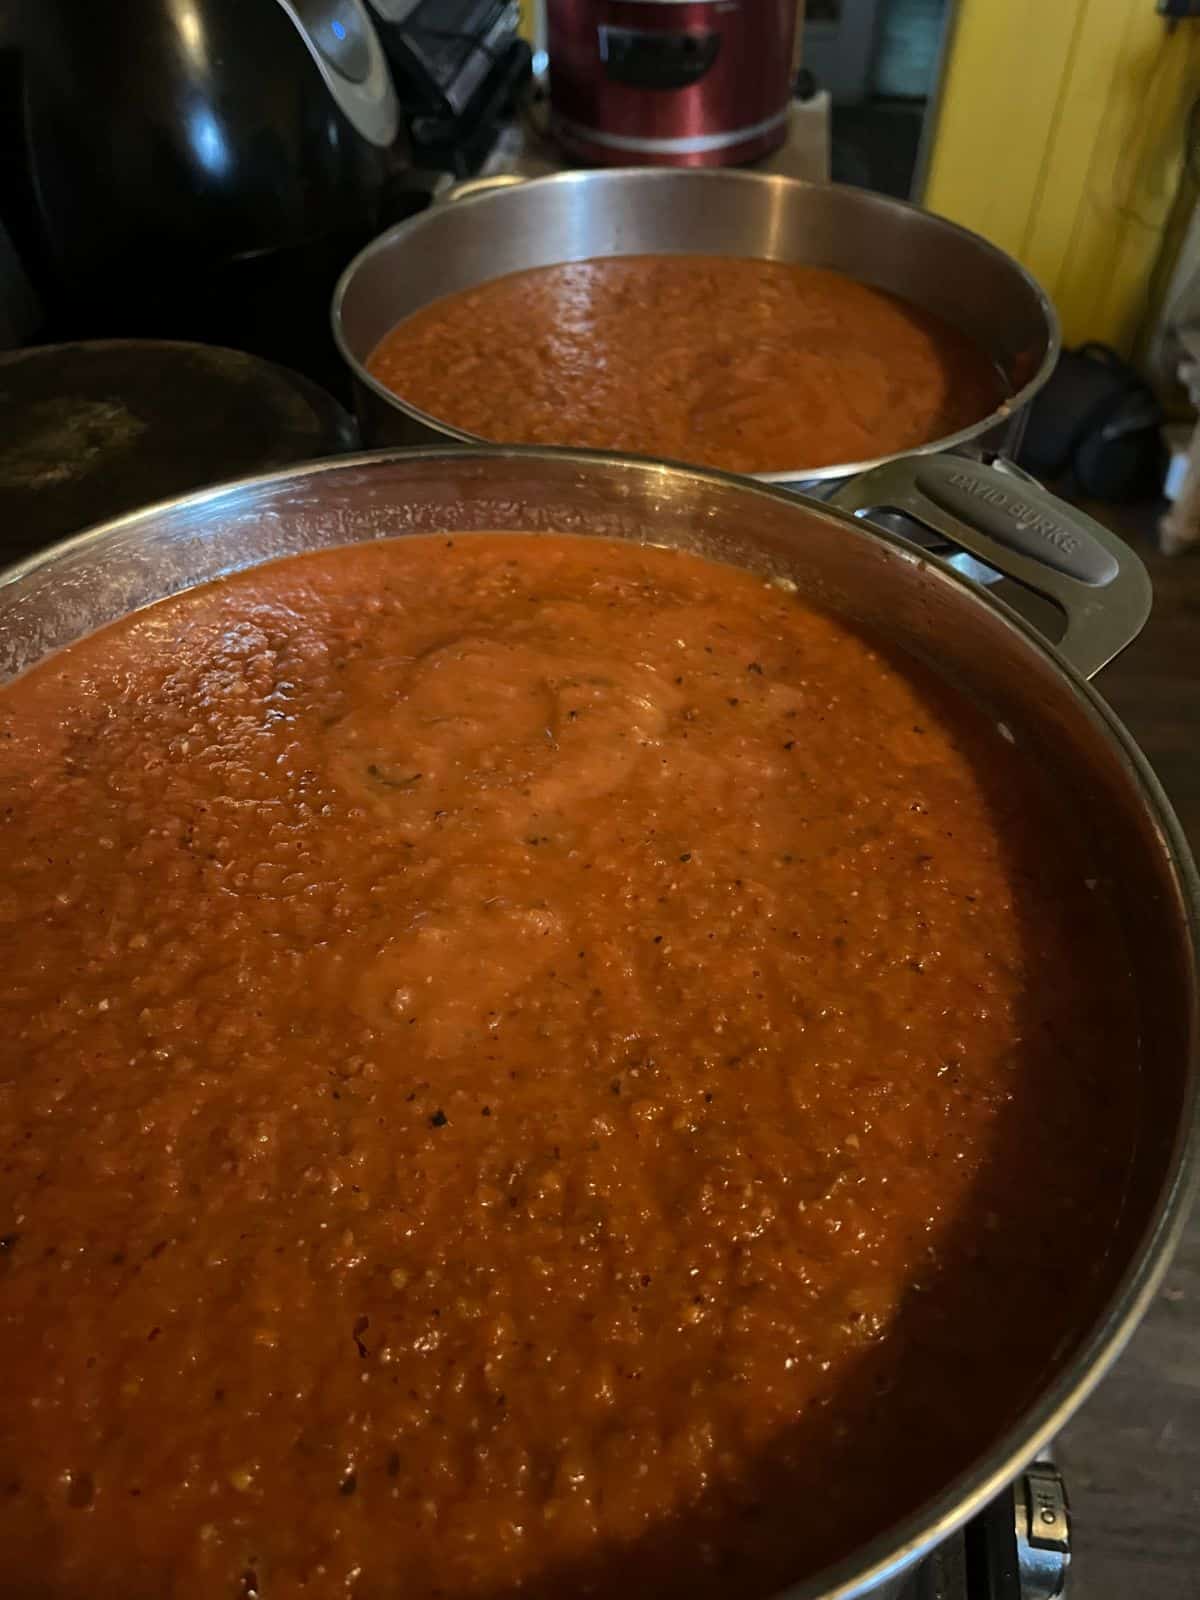 Smoothly blended homemade roasted tomato sauce with seeds and skins